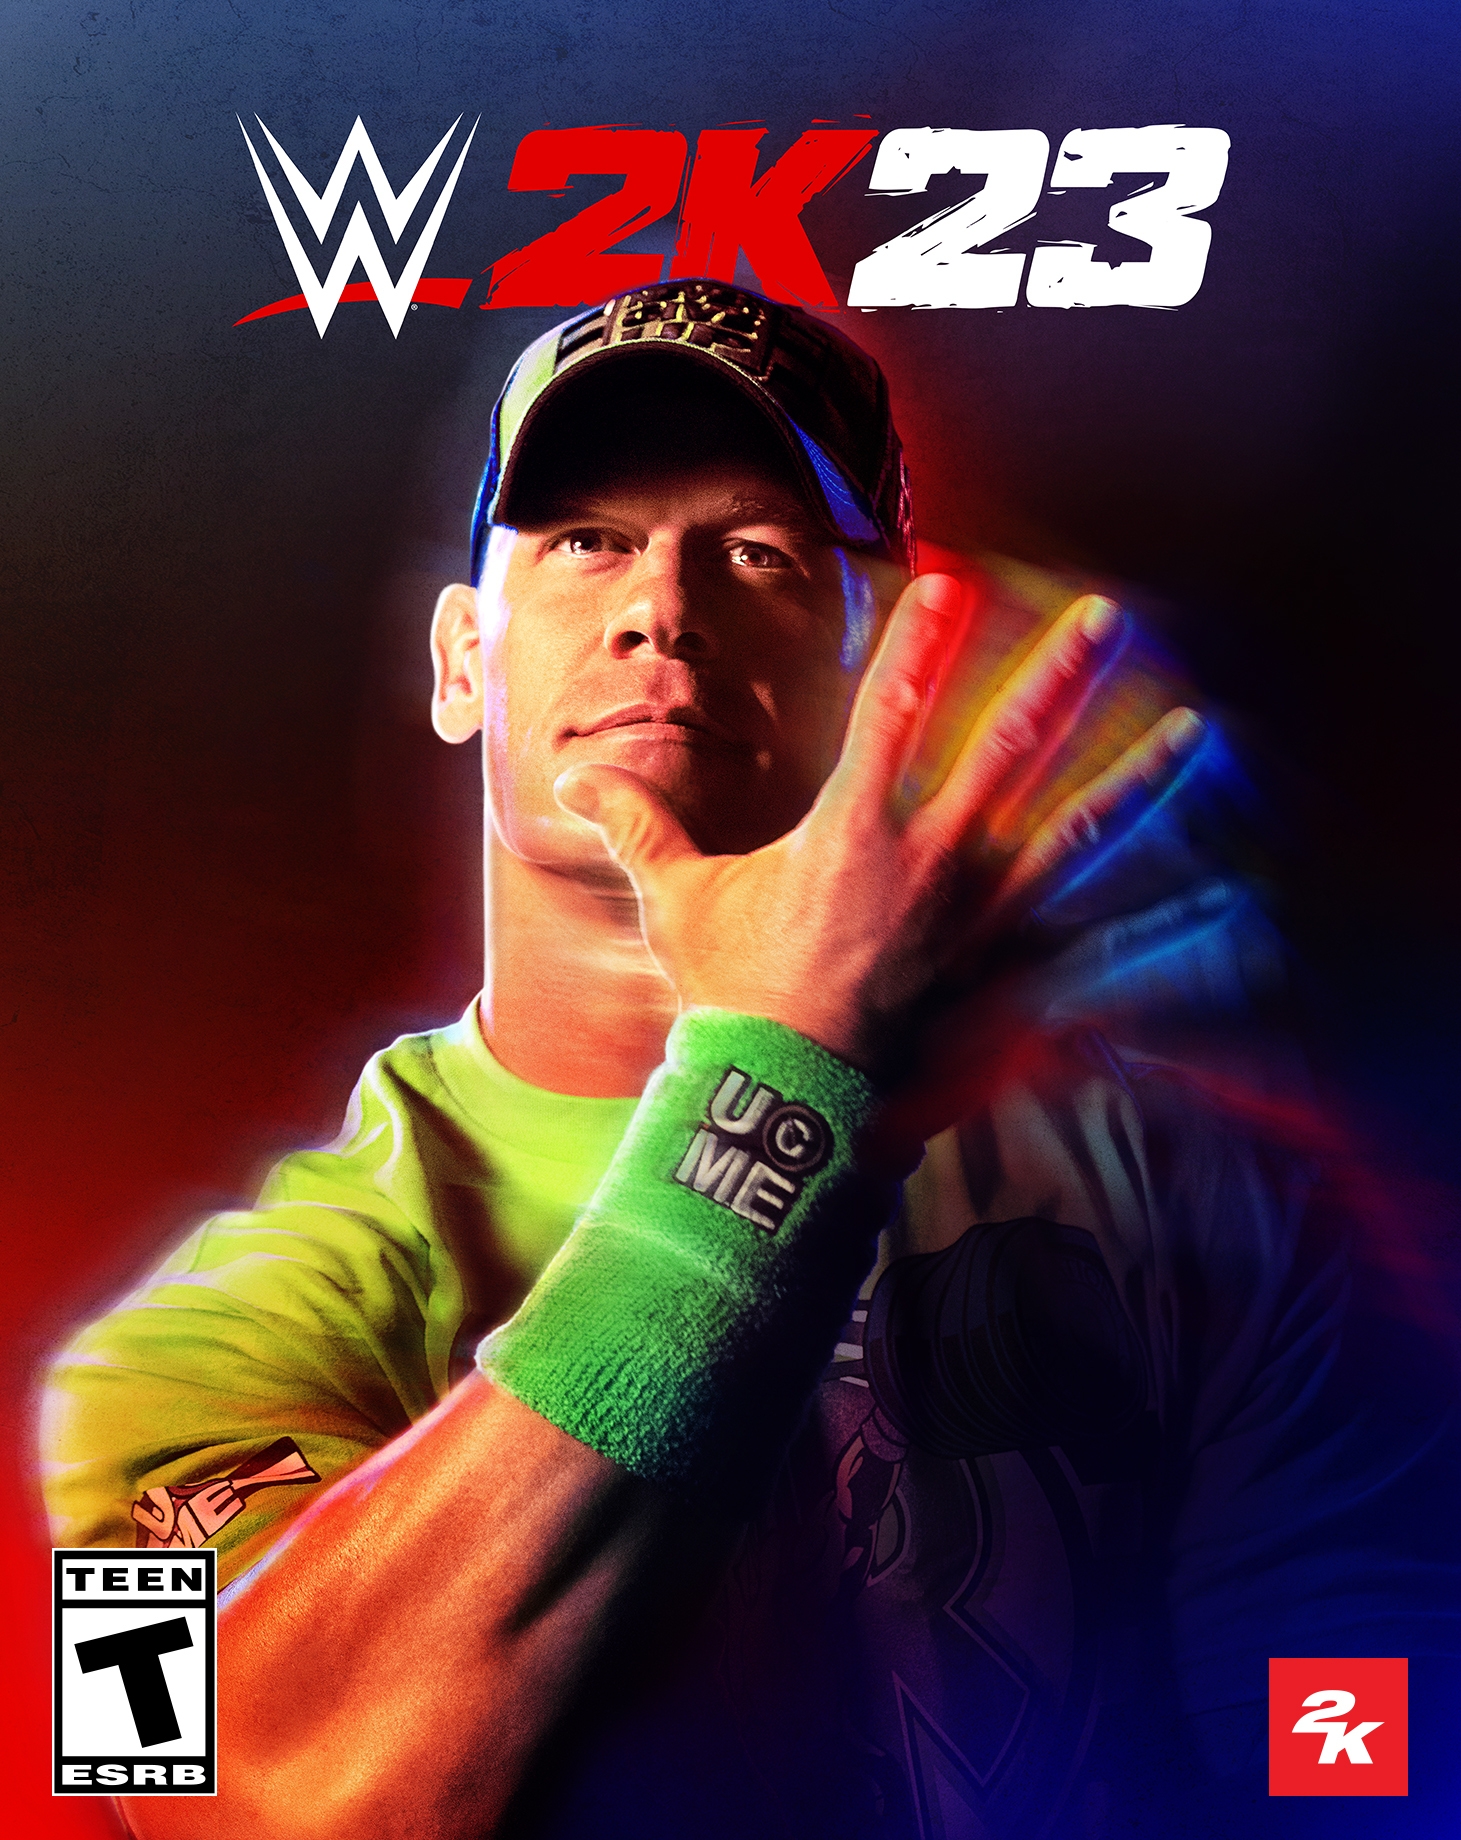 WWE 2K23 Cover Art: Standard, Deluxe & Icon Editions